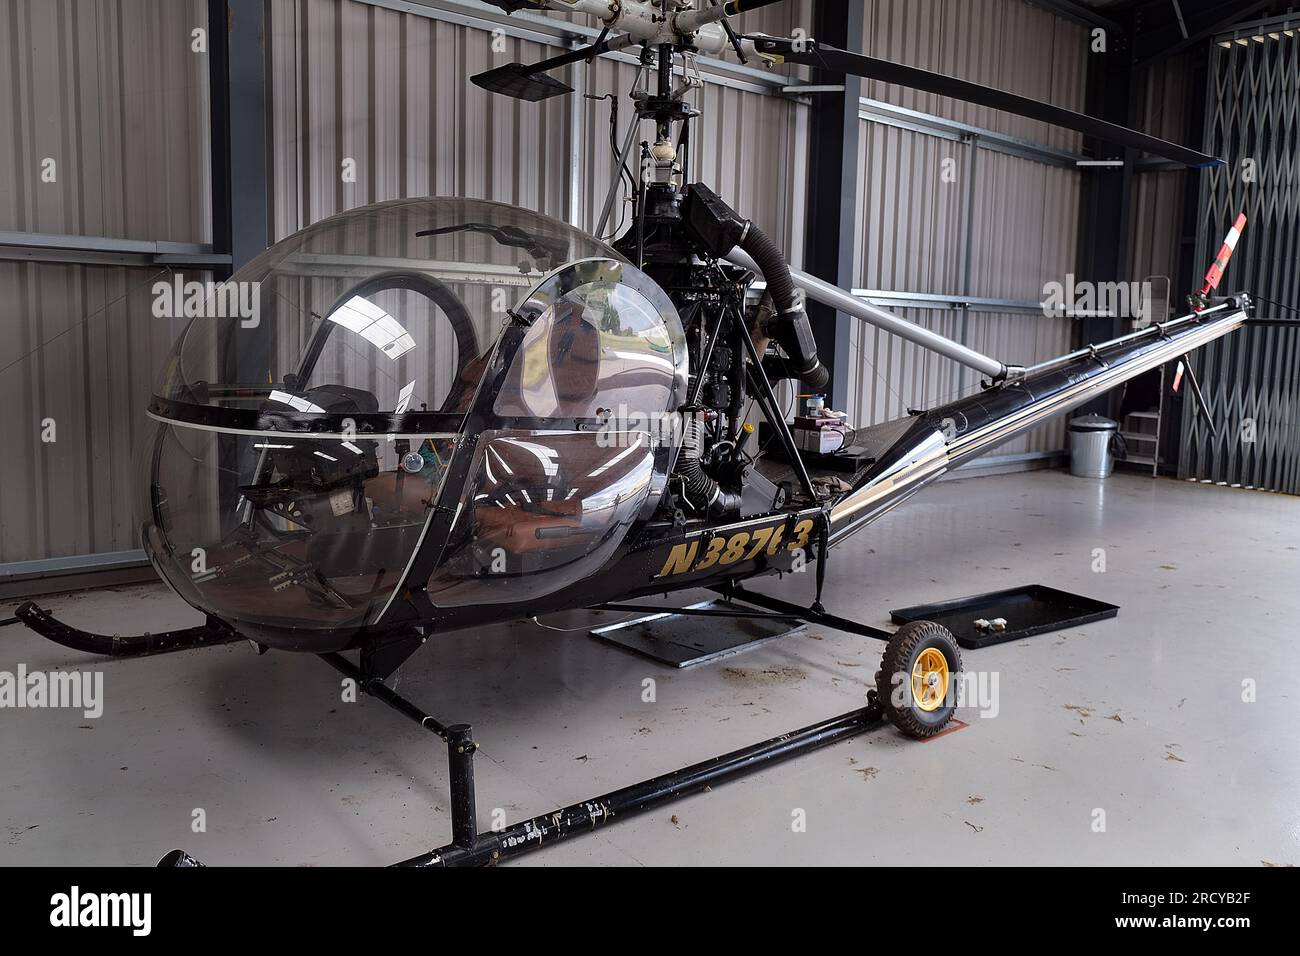 The Bell 47 is a single-rotor single-engine light helicopter manufactured by Bell Helicopter. Stock Photo